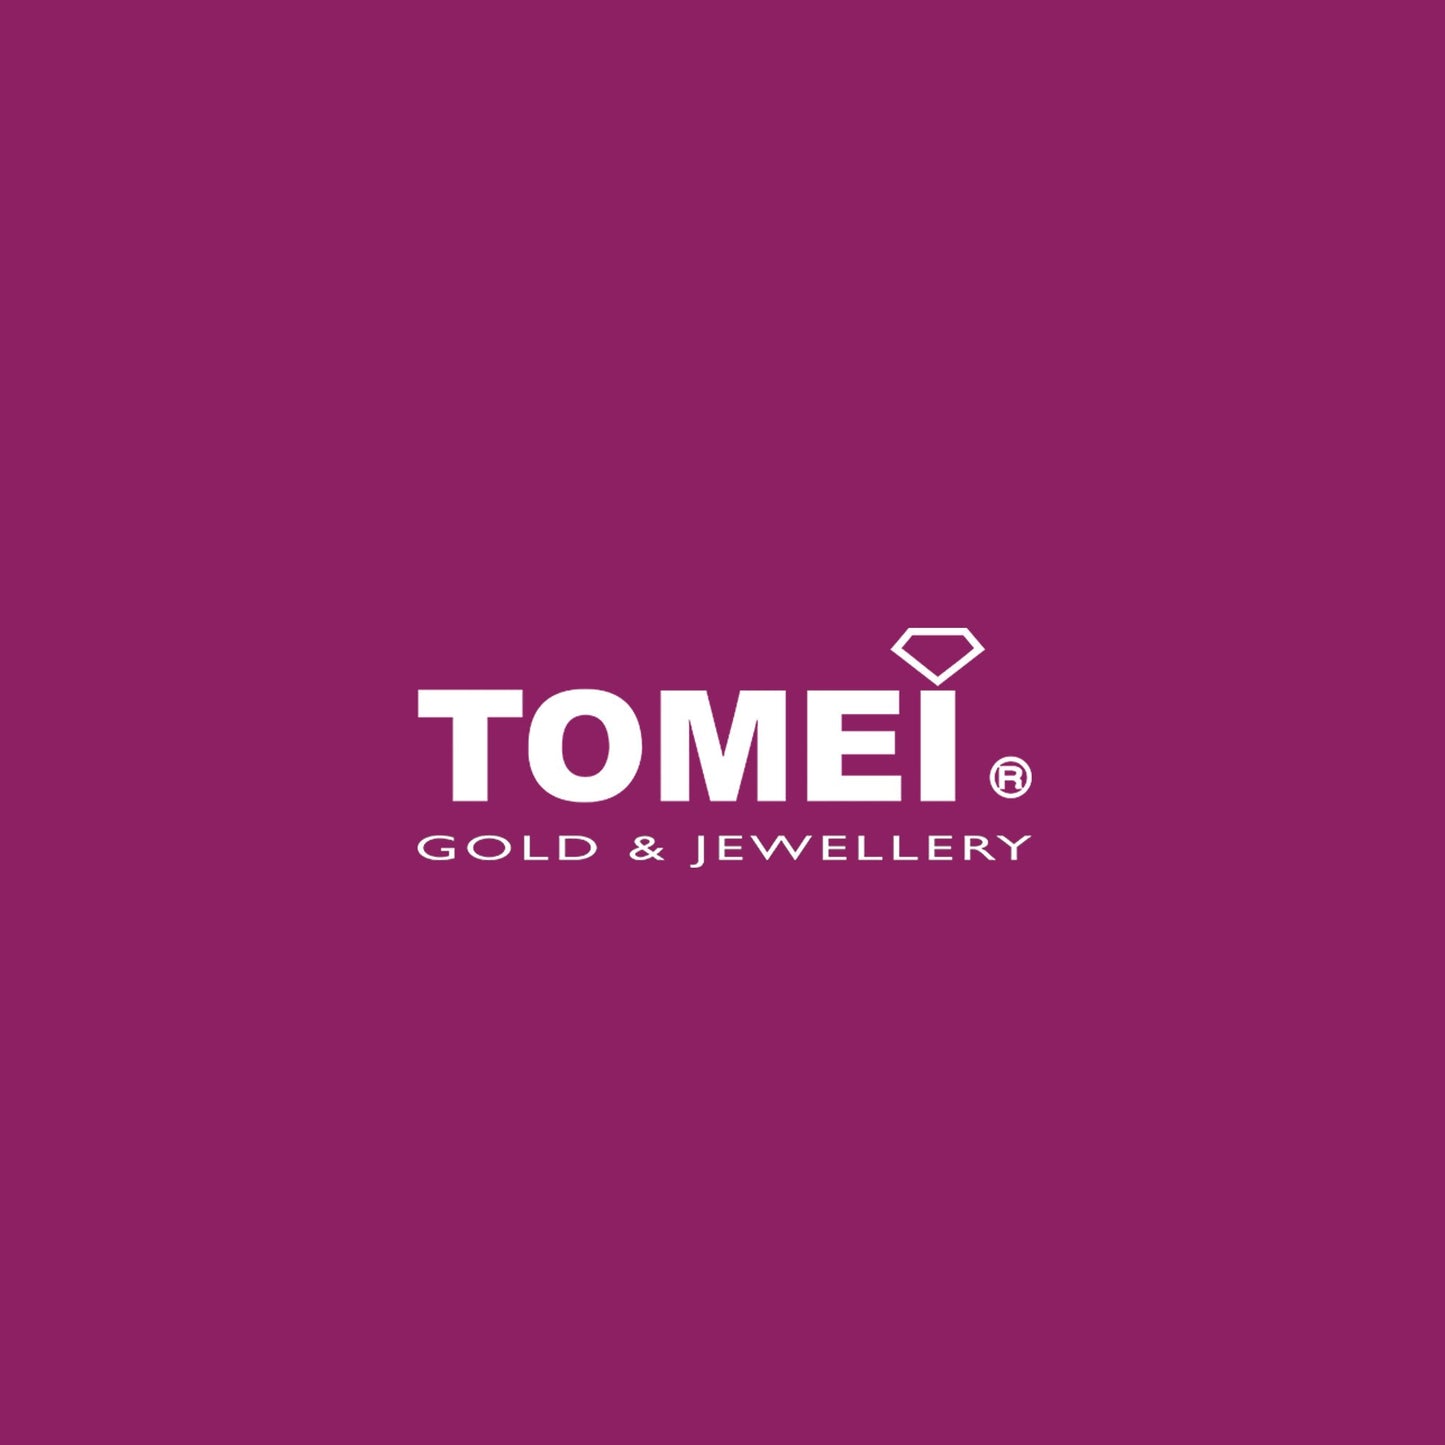 TOMEI Diamond Cut Collection Cross Twisted Ring, Yellow Gold 916